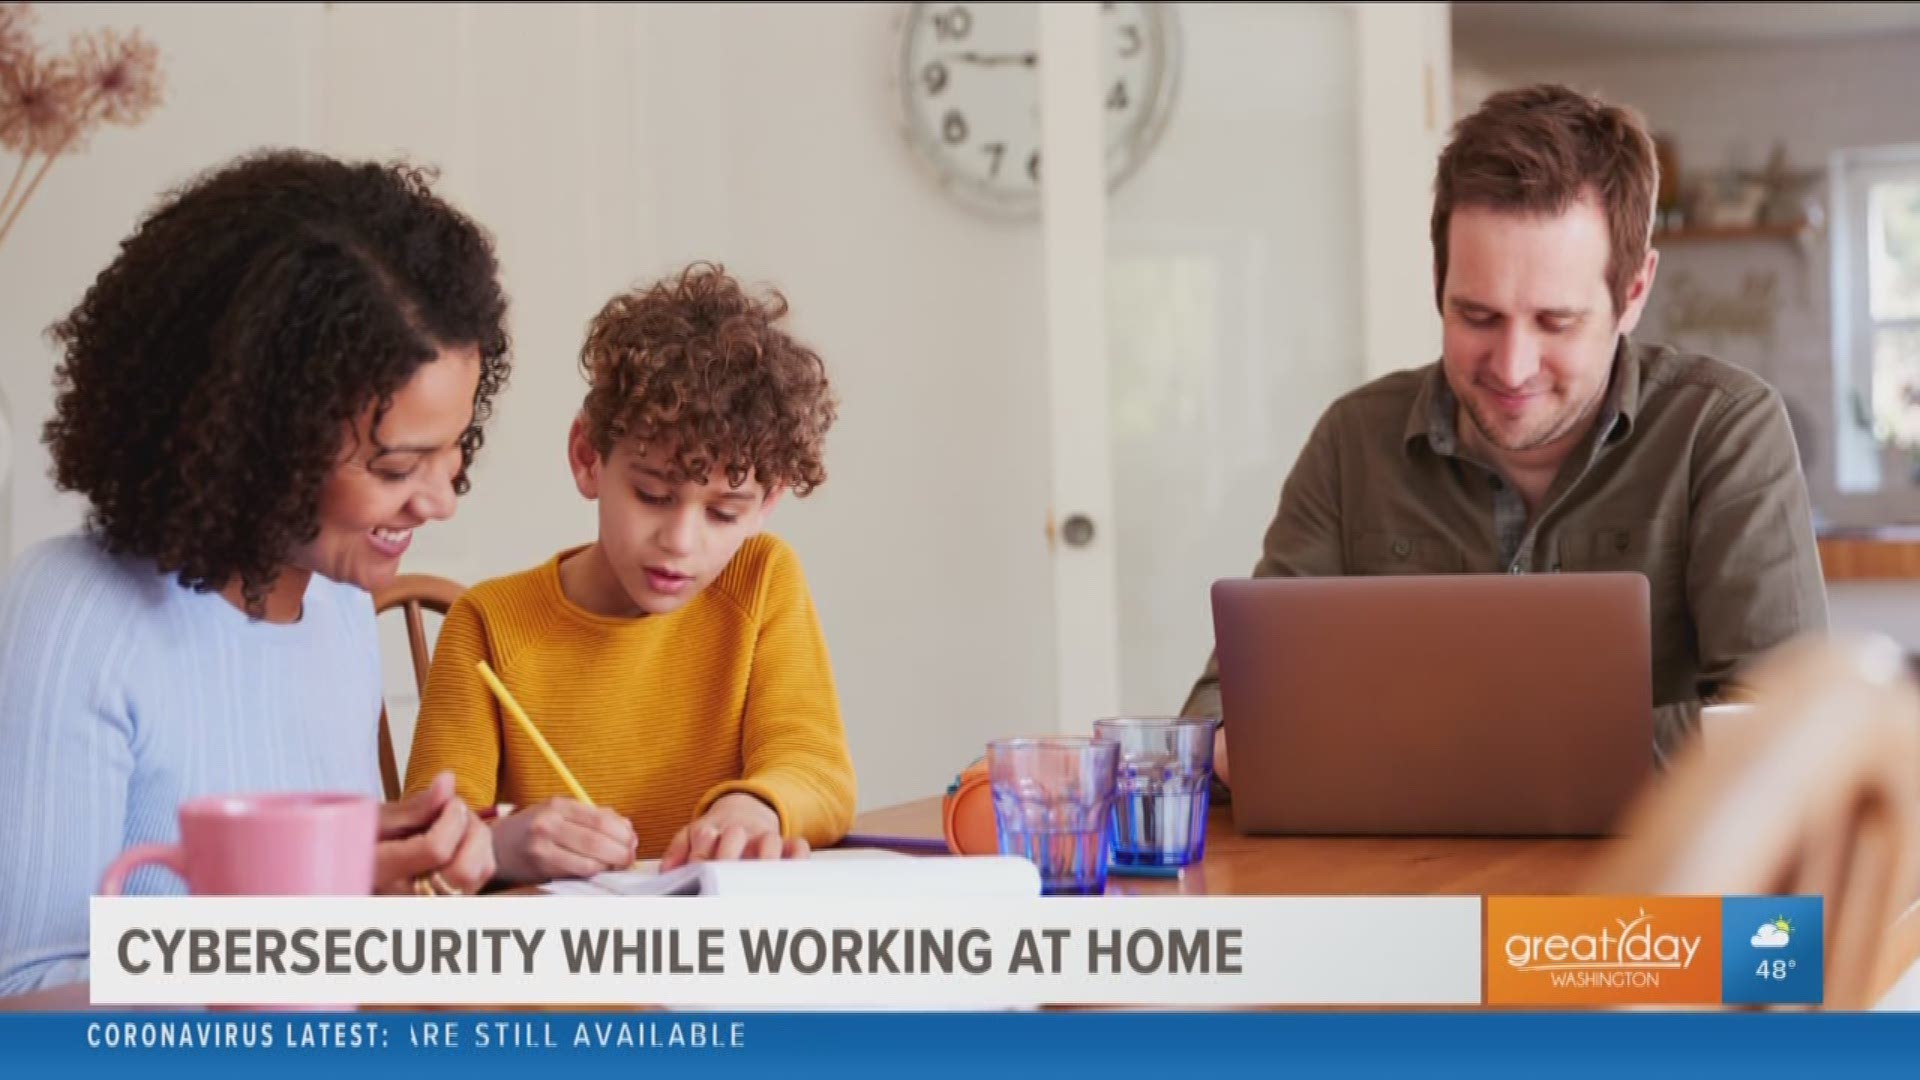 Mark Gilroy, CEO of Fornetix, shares some cybersecurity tips for employees working from home.